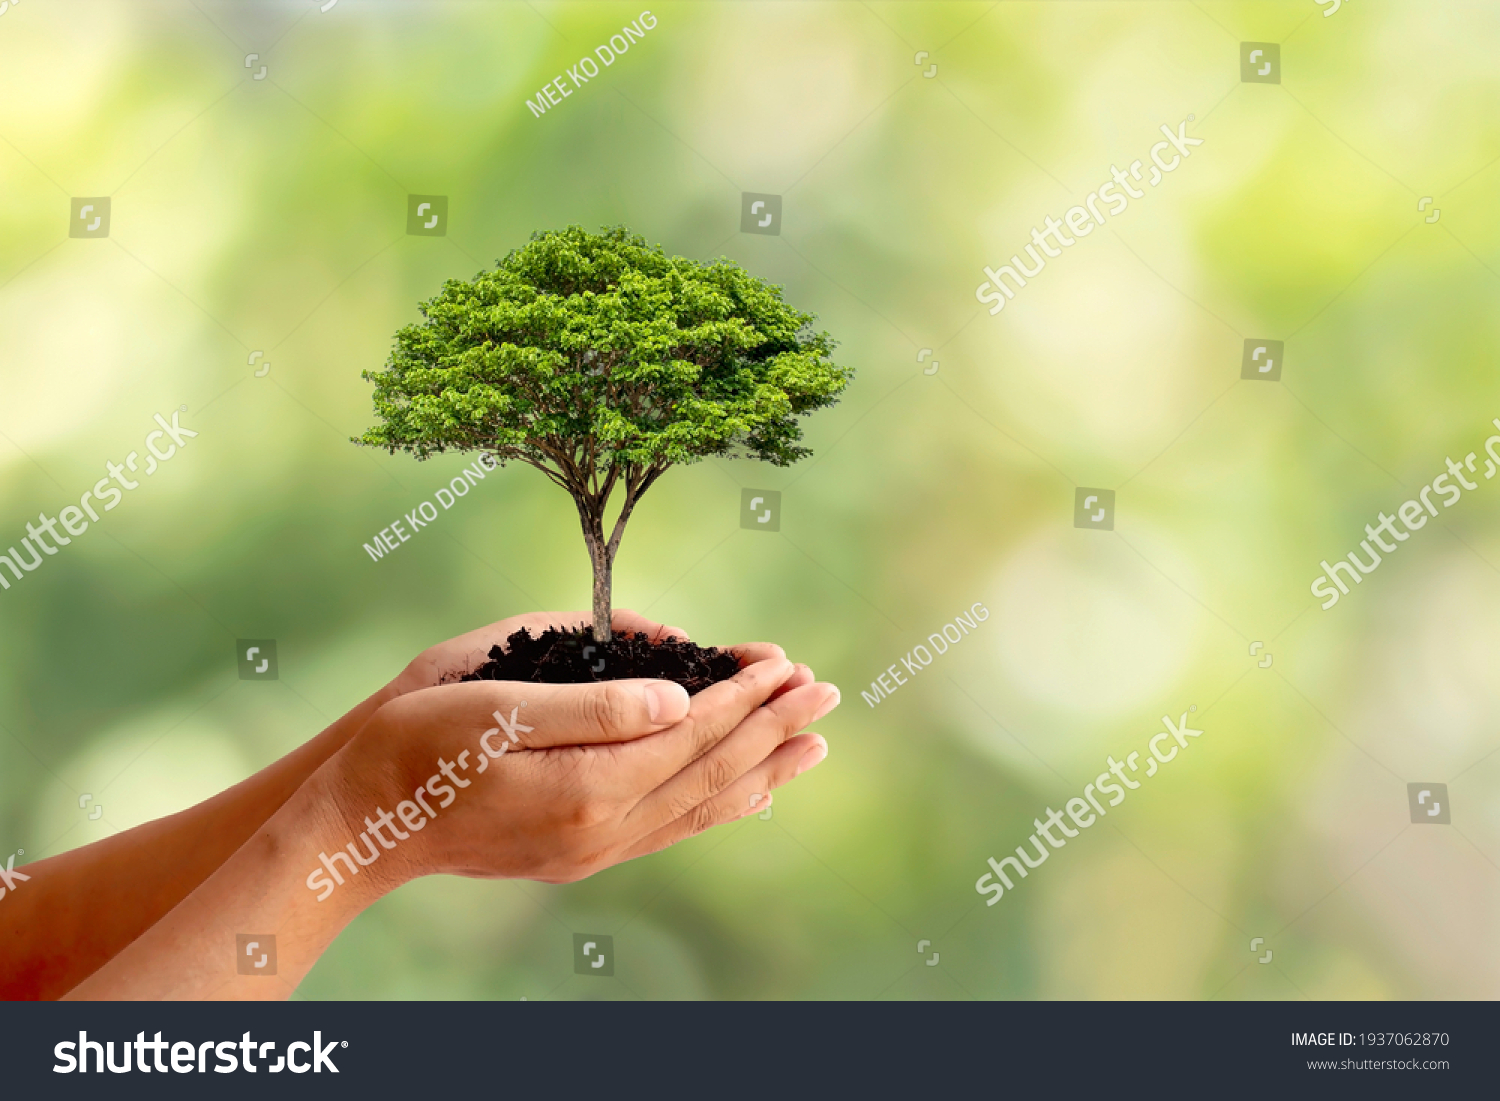 Trees are planted on the ground in human hands with natural green backgrounds, the concept of plant growth, and environmental protection. #1937062870